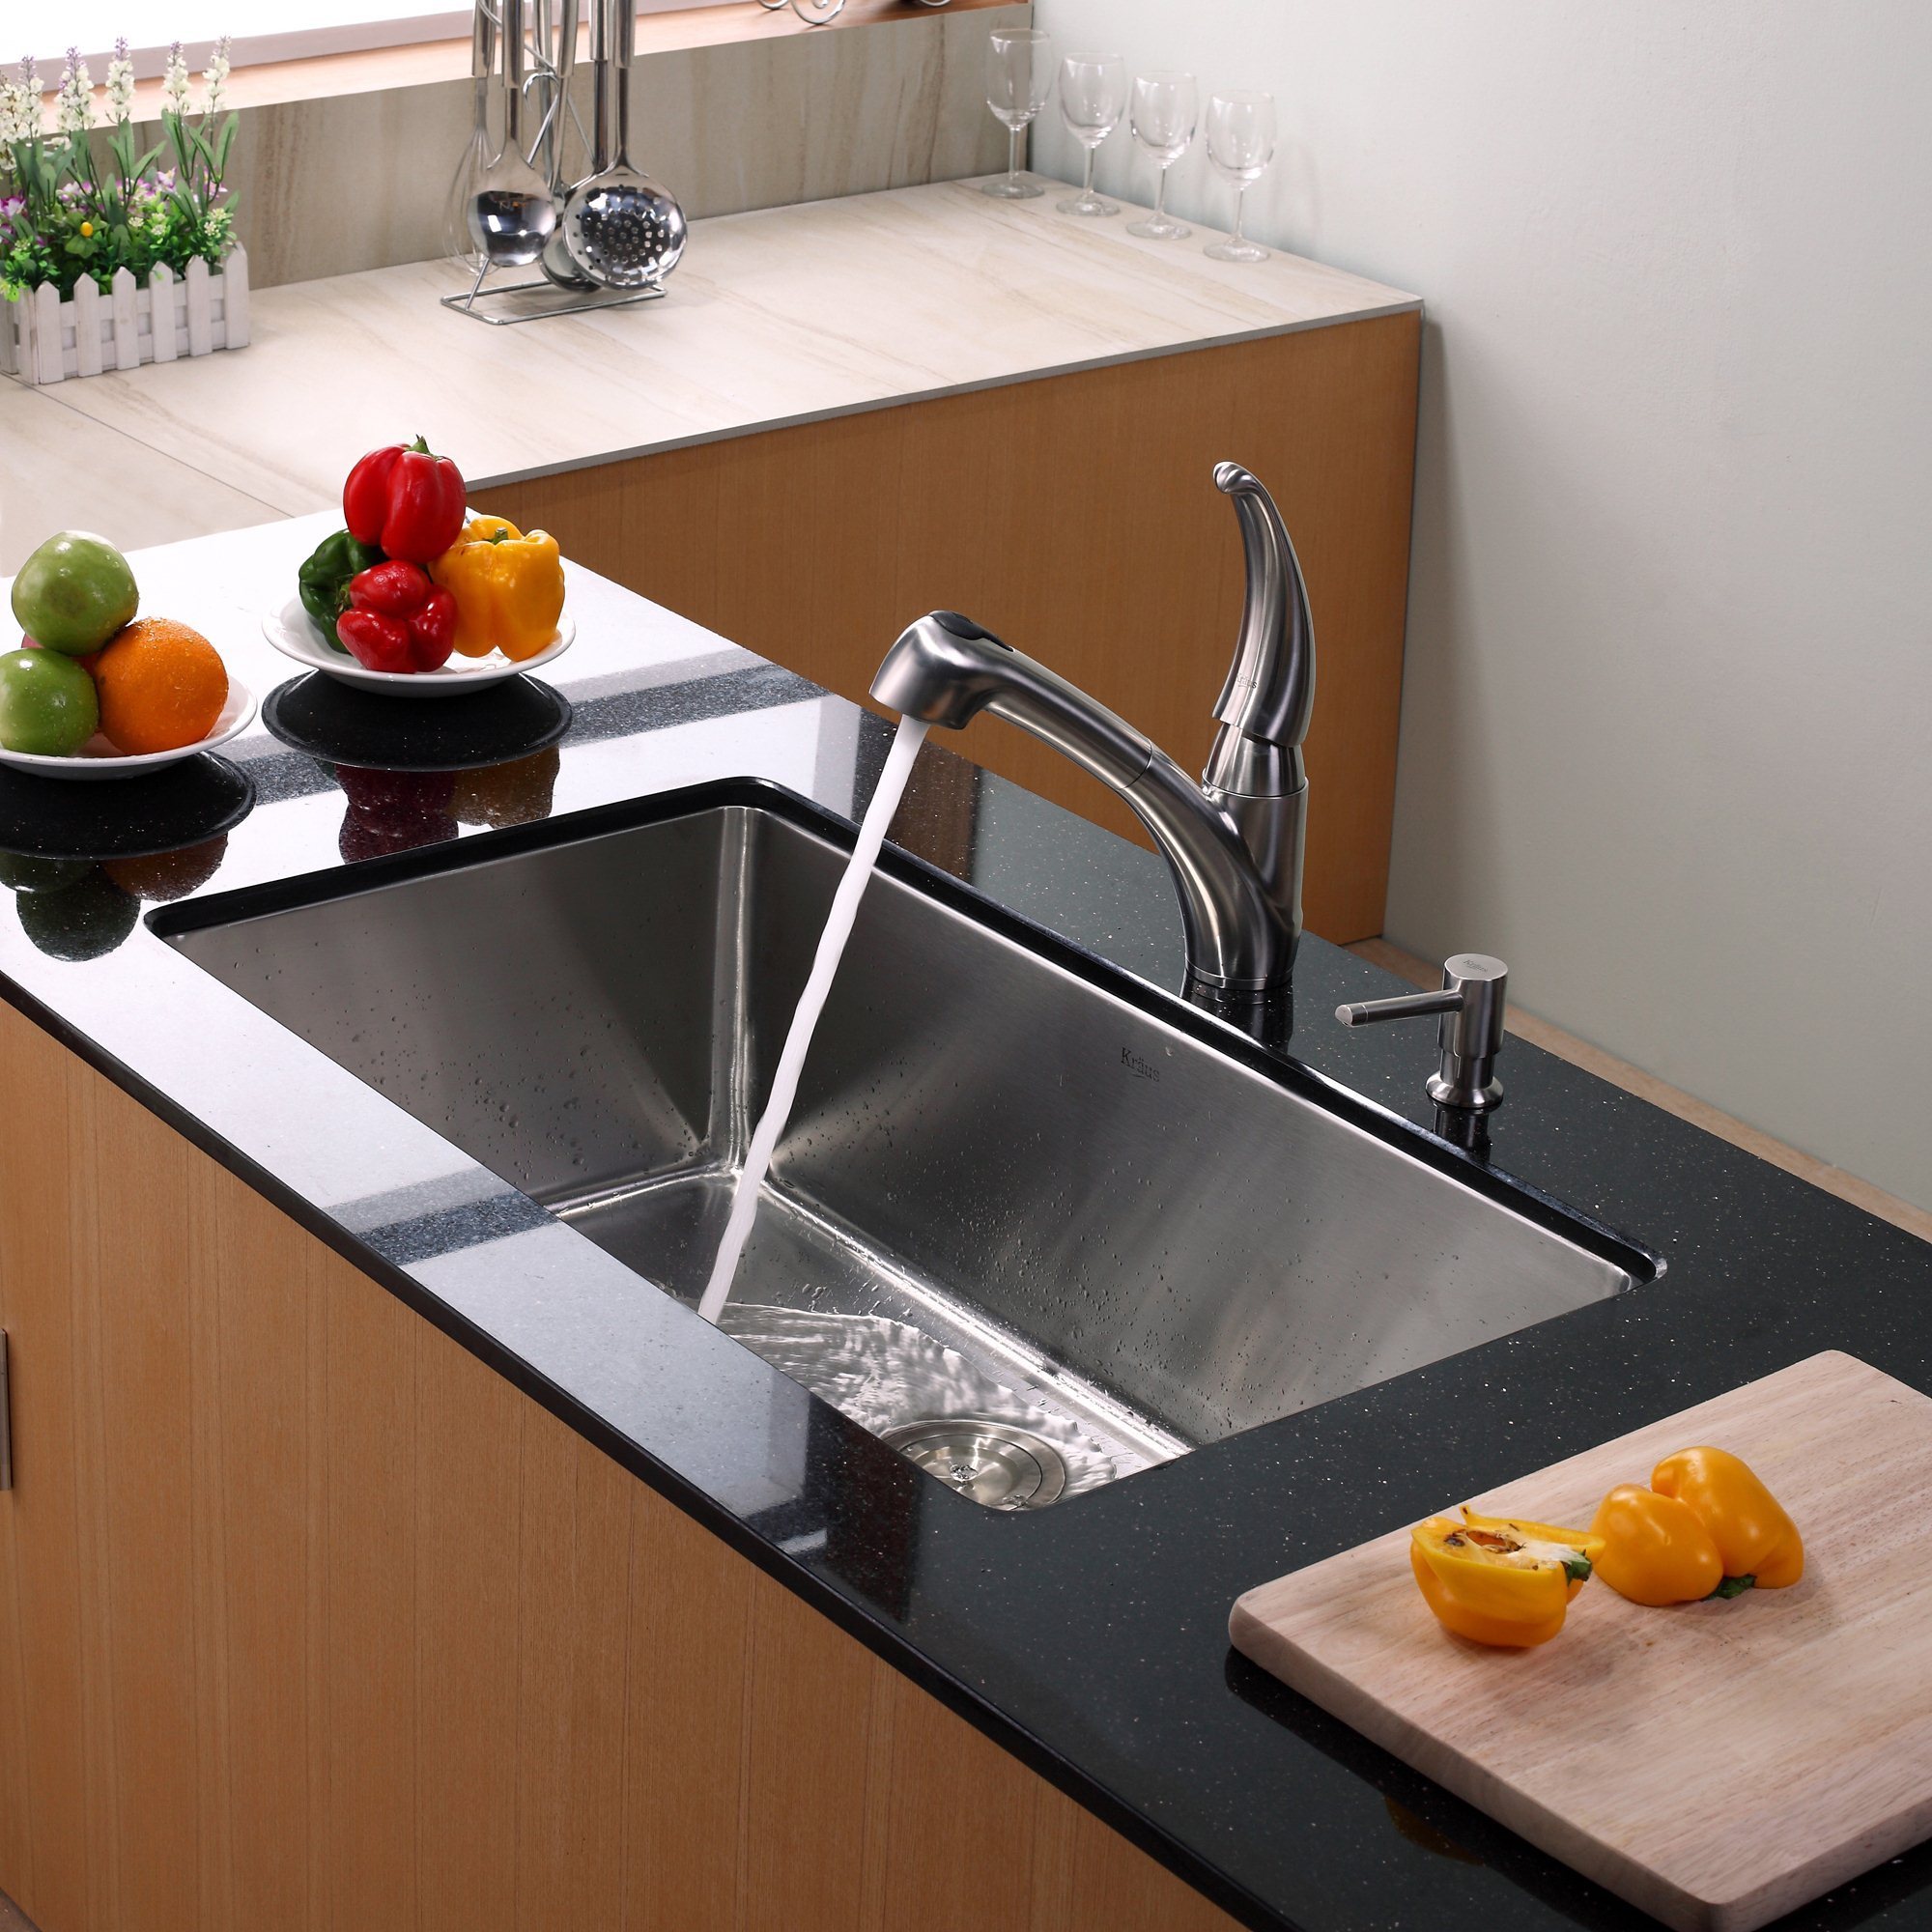 https://ak1.ostkcdn.com/images/products/4370531/Kraus-Kitchen-Combo-Set-Stainless-Steel-30-inch-Undermount-Sink-with-Faucet-9a5c5eac-350a-46bf-86b5-30f73aa598ef.jpg